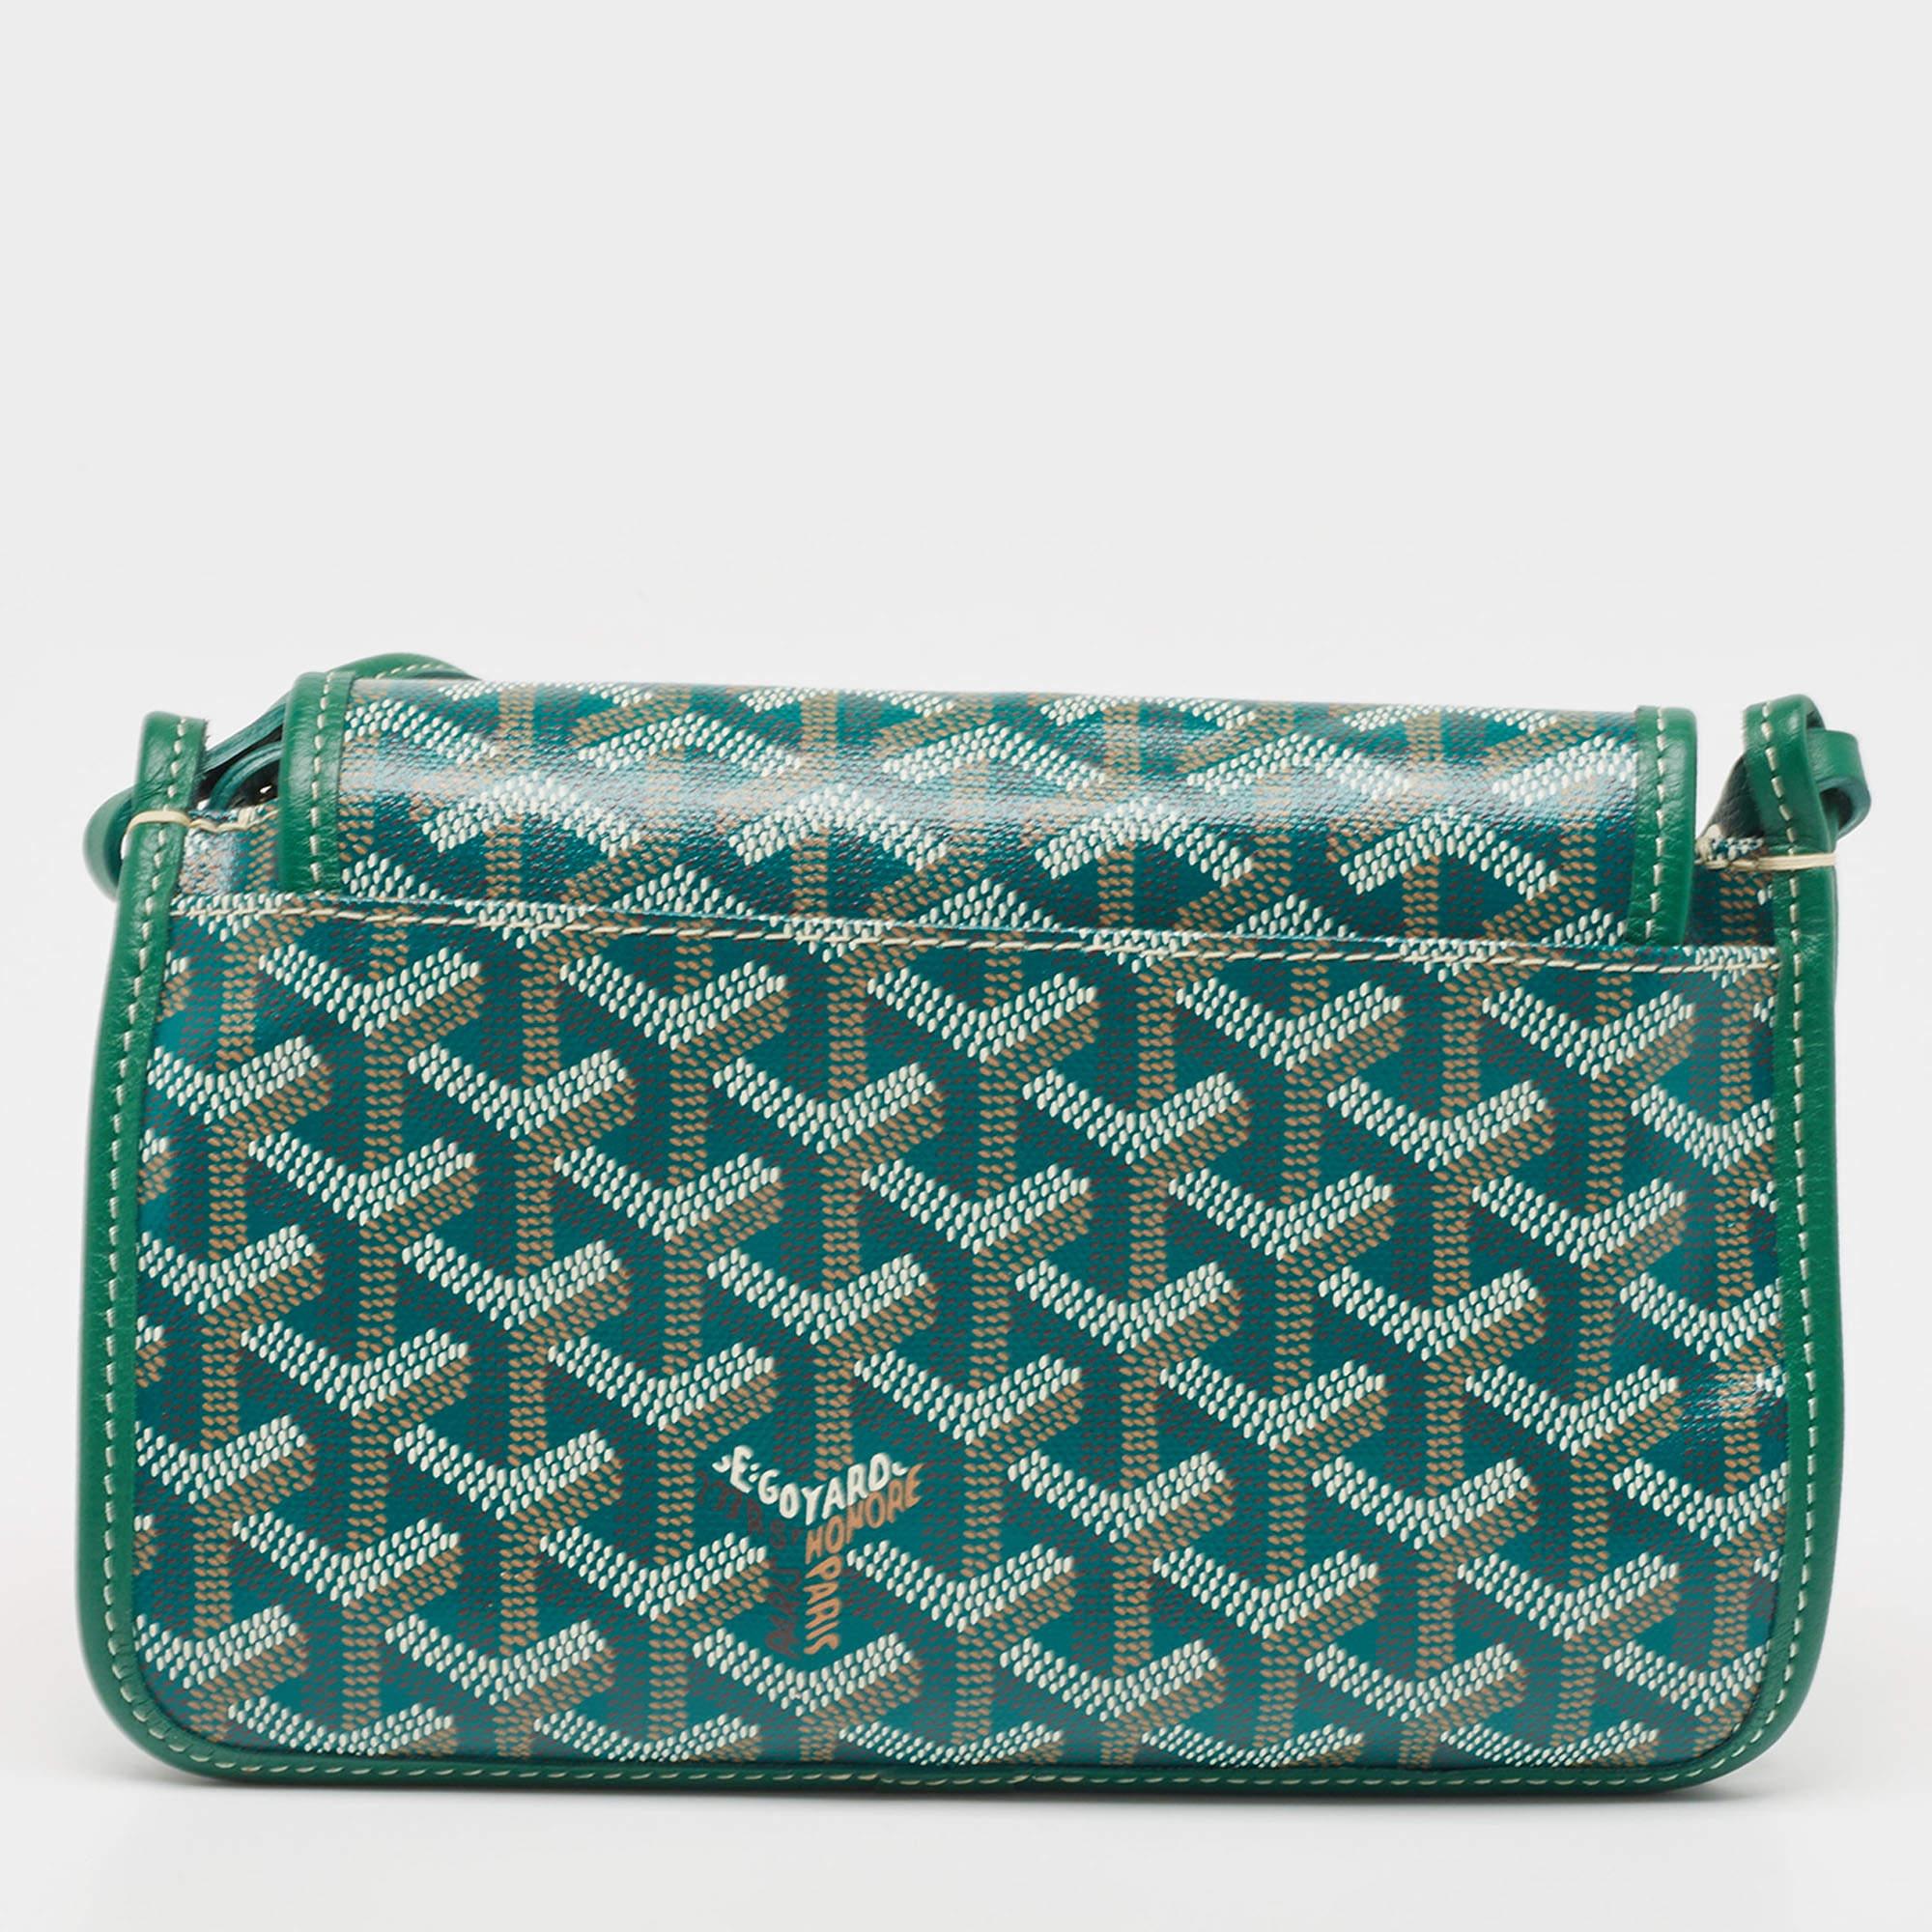 Indulge in timeless luxury with this Goyard bag. Meticulously crafted, this iconic piece combines heritage, elegance, and craftsmanship, elevating your style to a level of unmatched sophistication.

Includes: Original Dustbag

